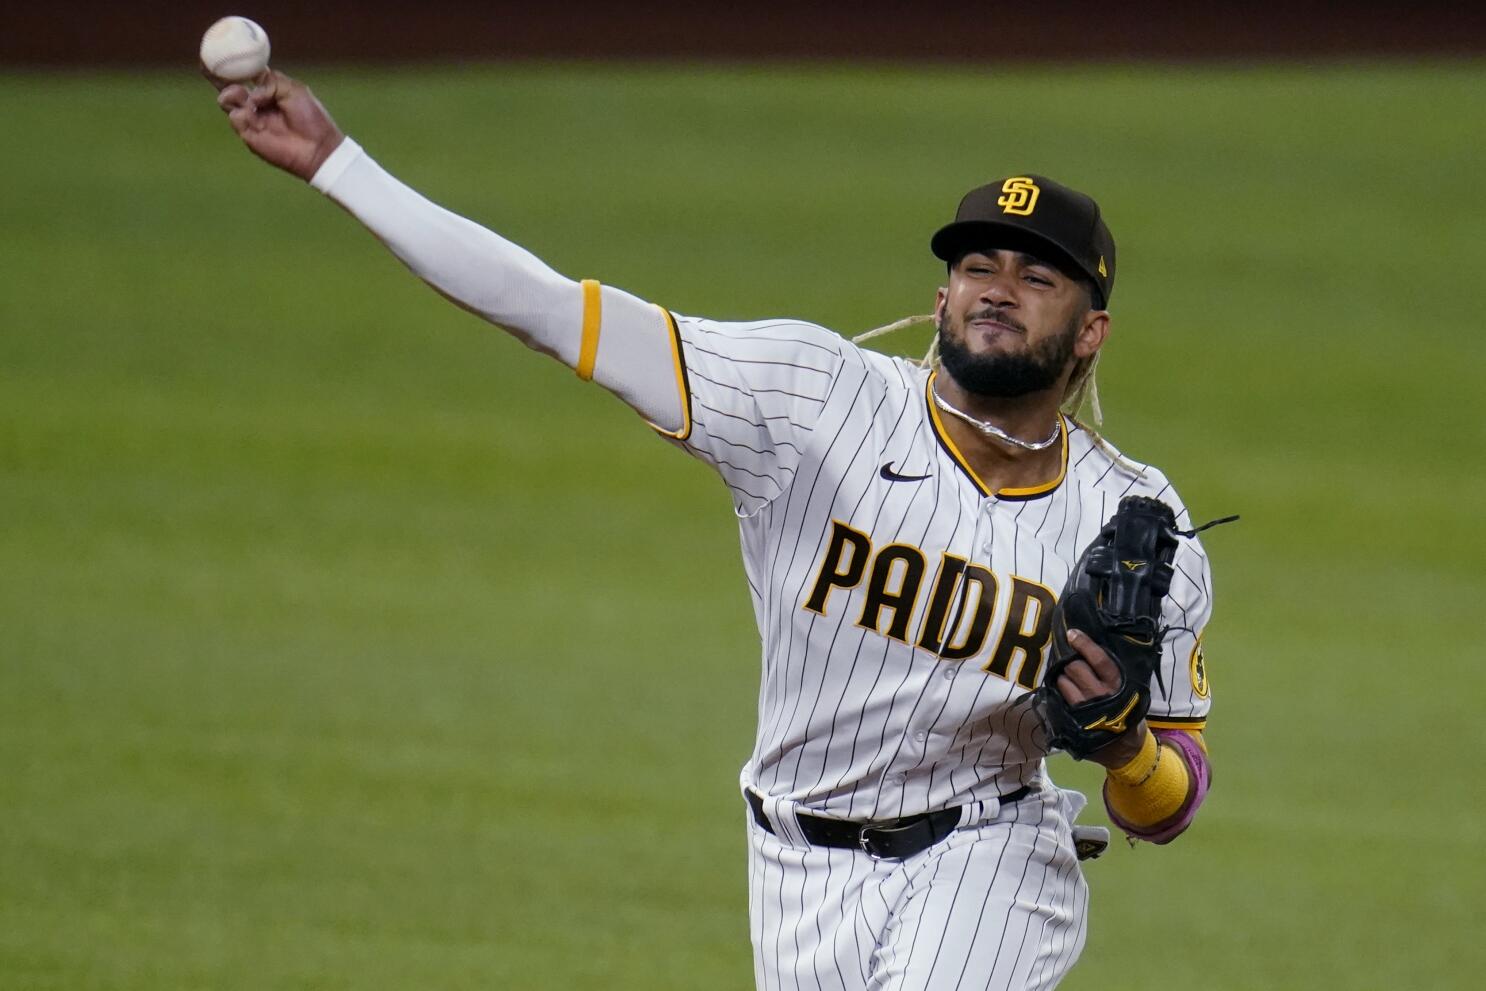 Padres News: Tatis, Padres agree on 14-year, $340 million contract